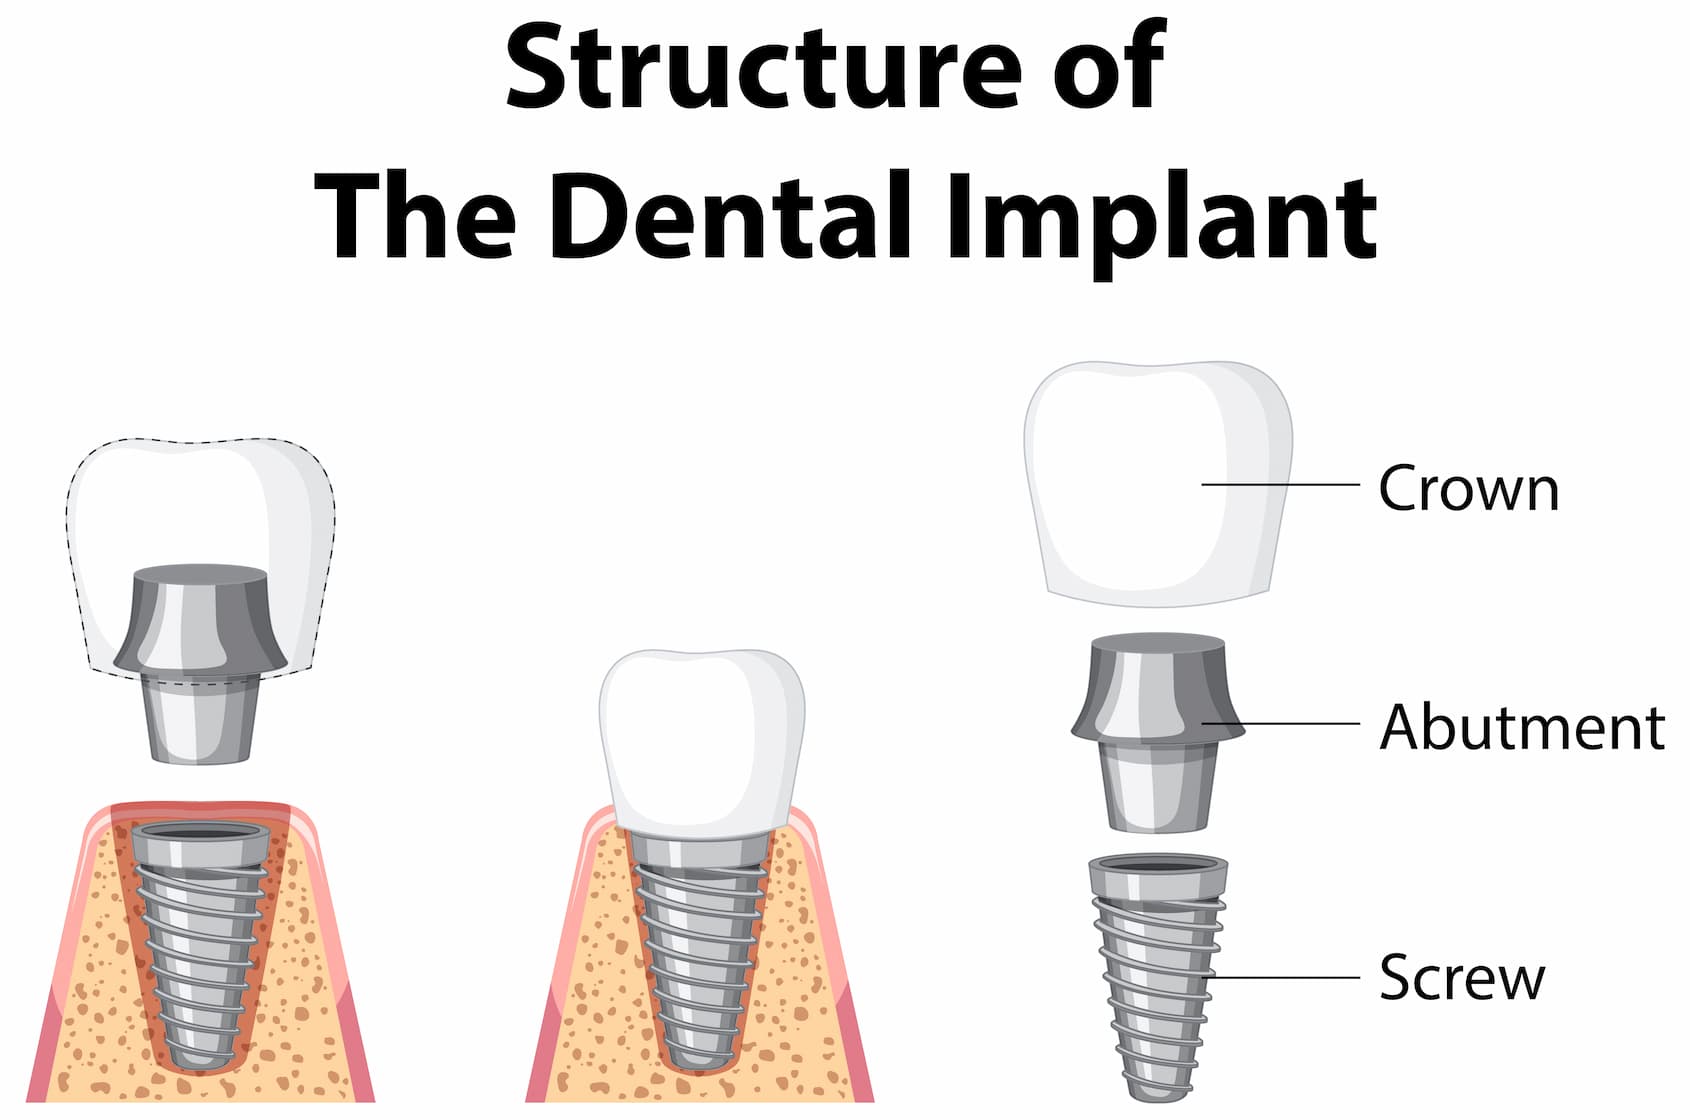 Structure of dental implant and how different components can be 3D printed